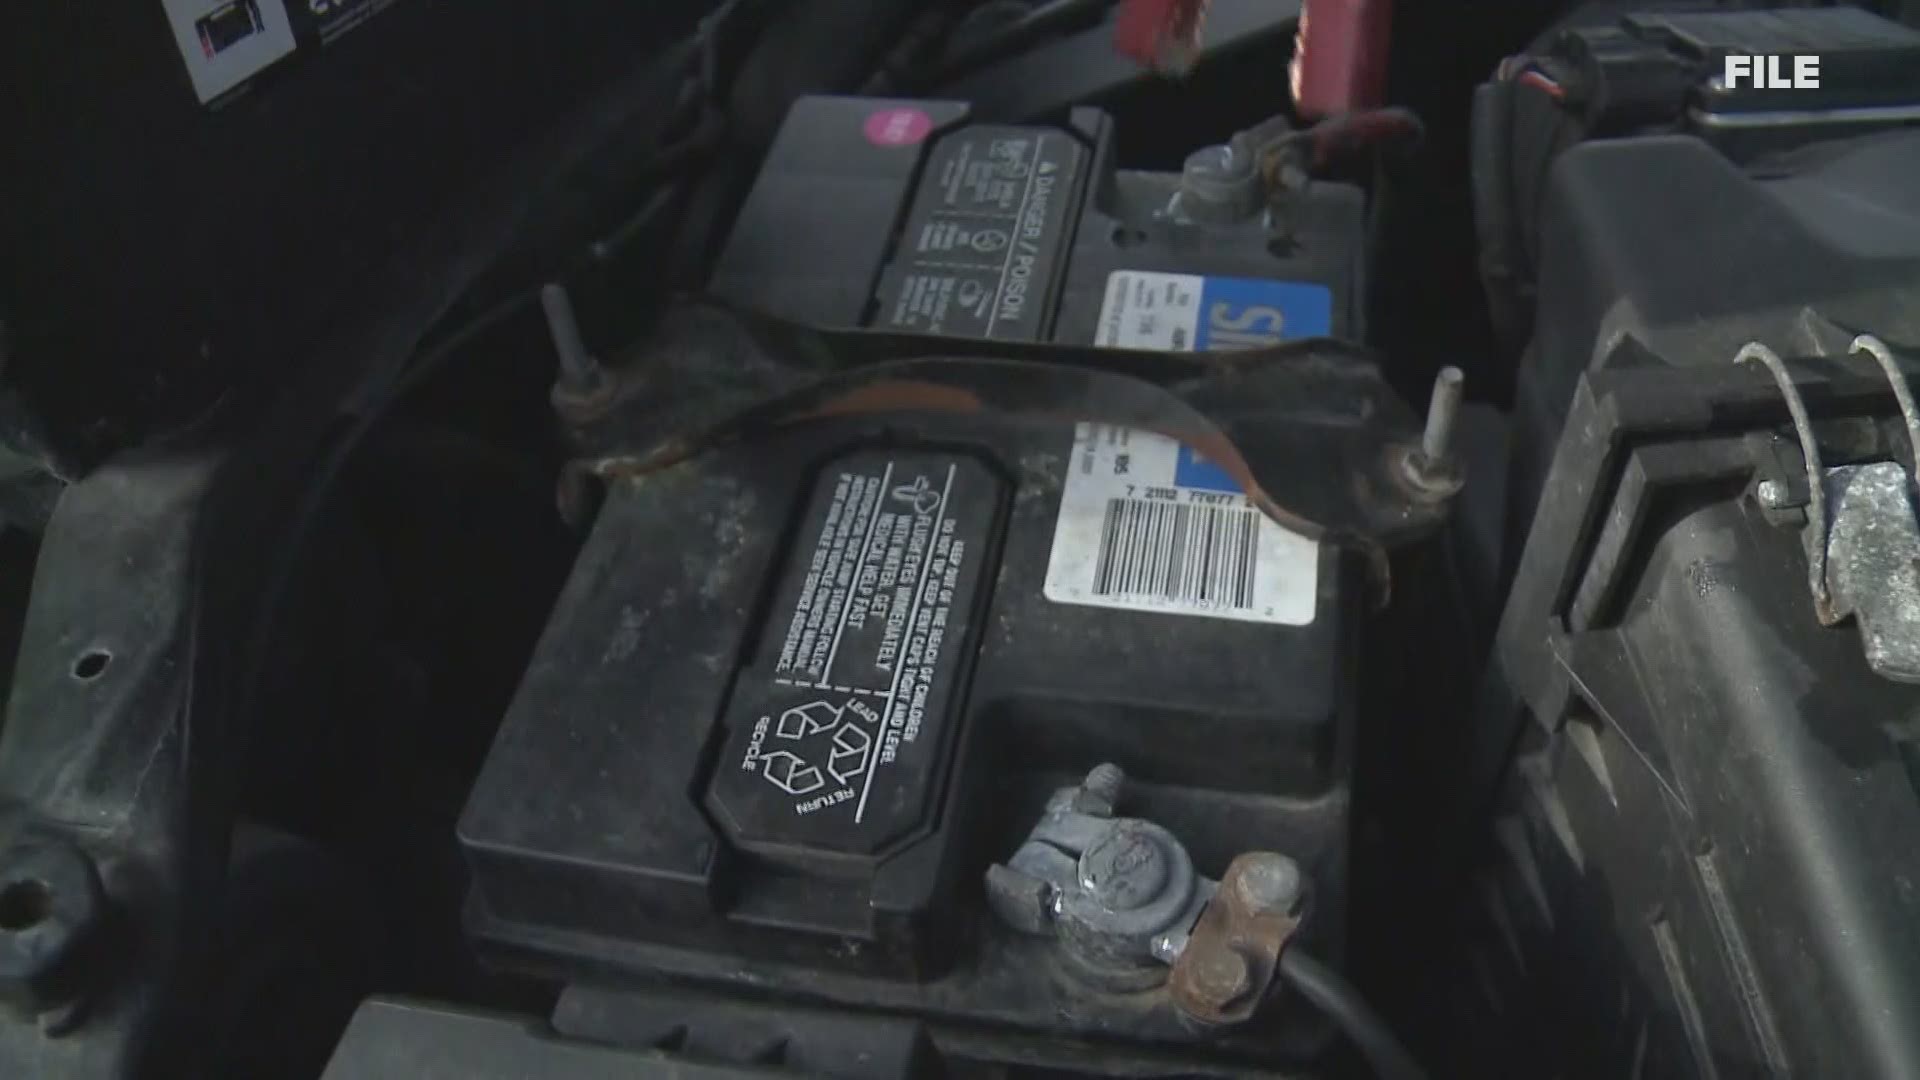 Car experts say problems can arise while your car sits weeks without being driven